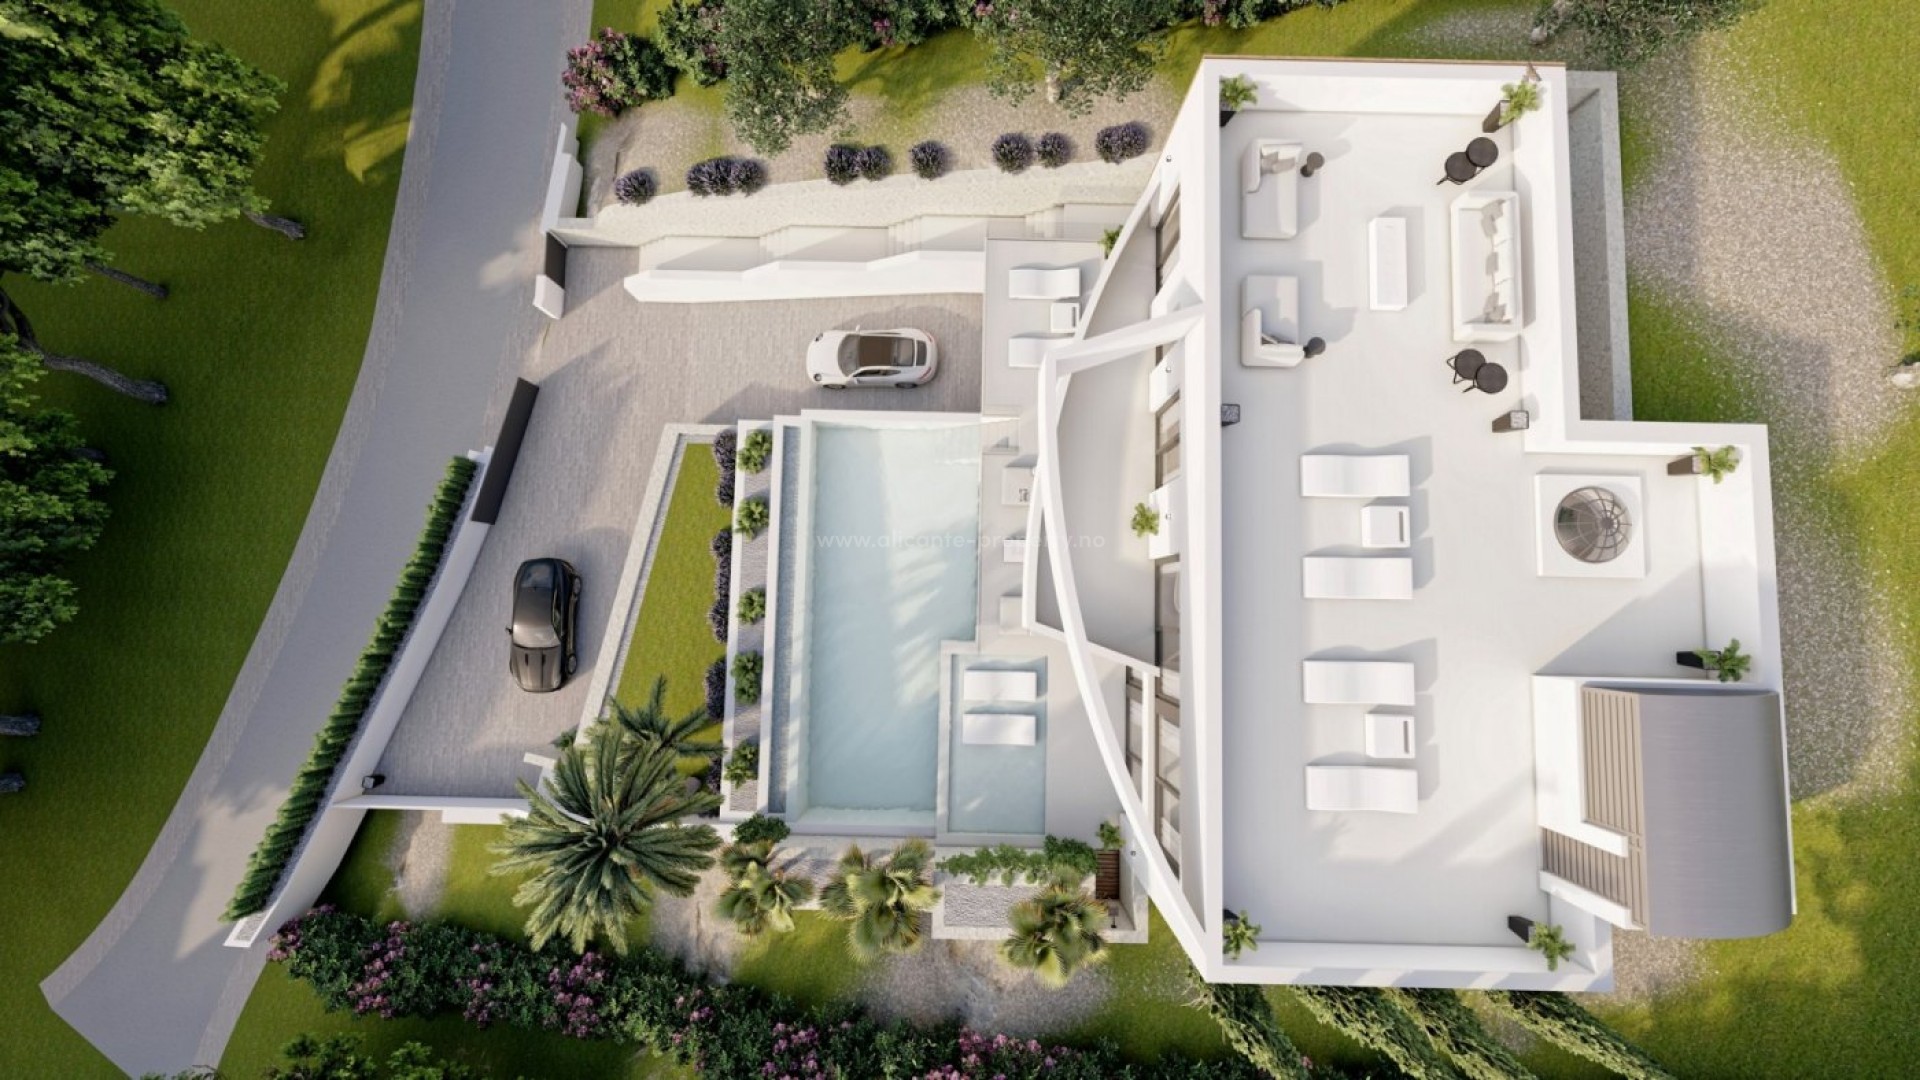 Luxury villa in Altea with 4 spacious bedrooms and 5 bathrooms, terrace at the rear of the property and a large pool terrace at the front with infinity pool